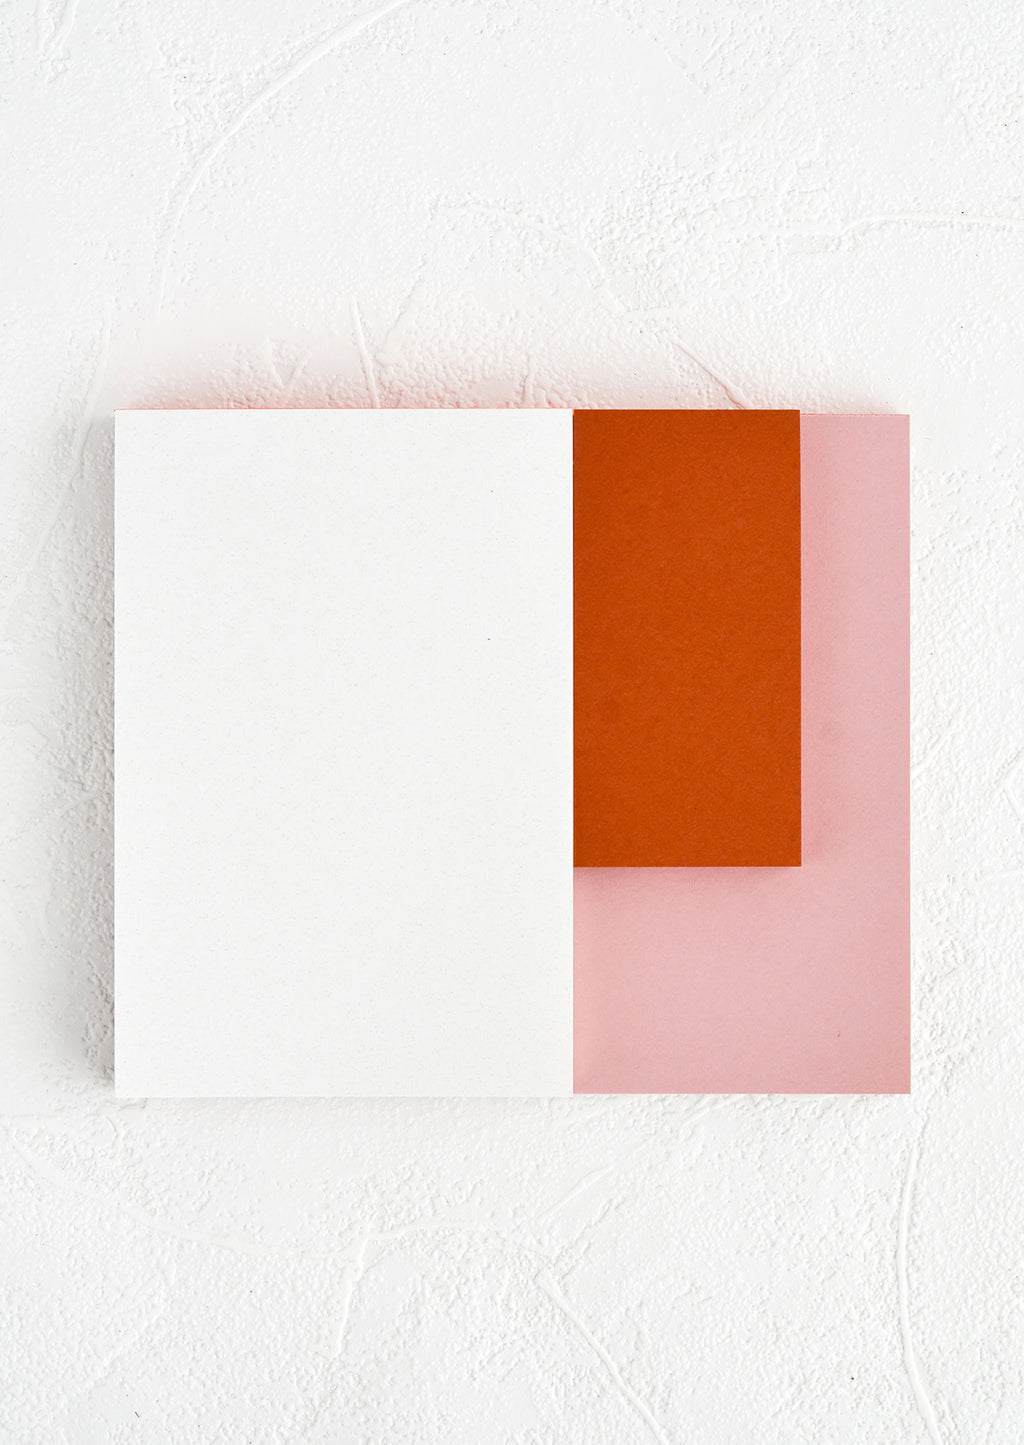 Rose / Terracotta / White: A landscape oriented notepad with three separate sized sections in different colors.